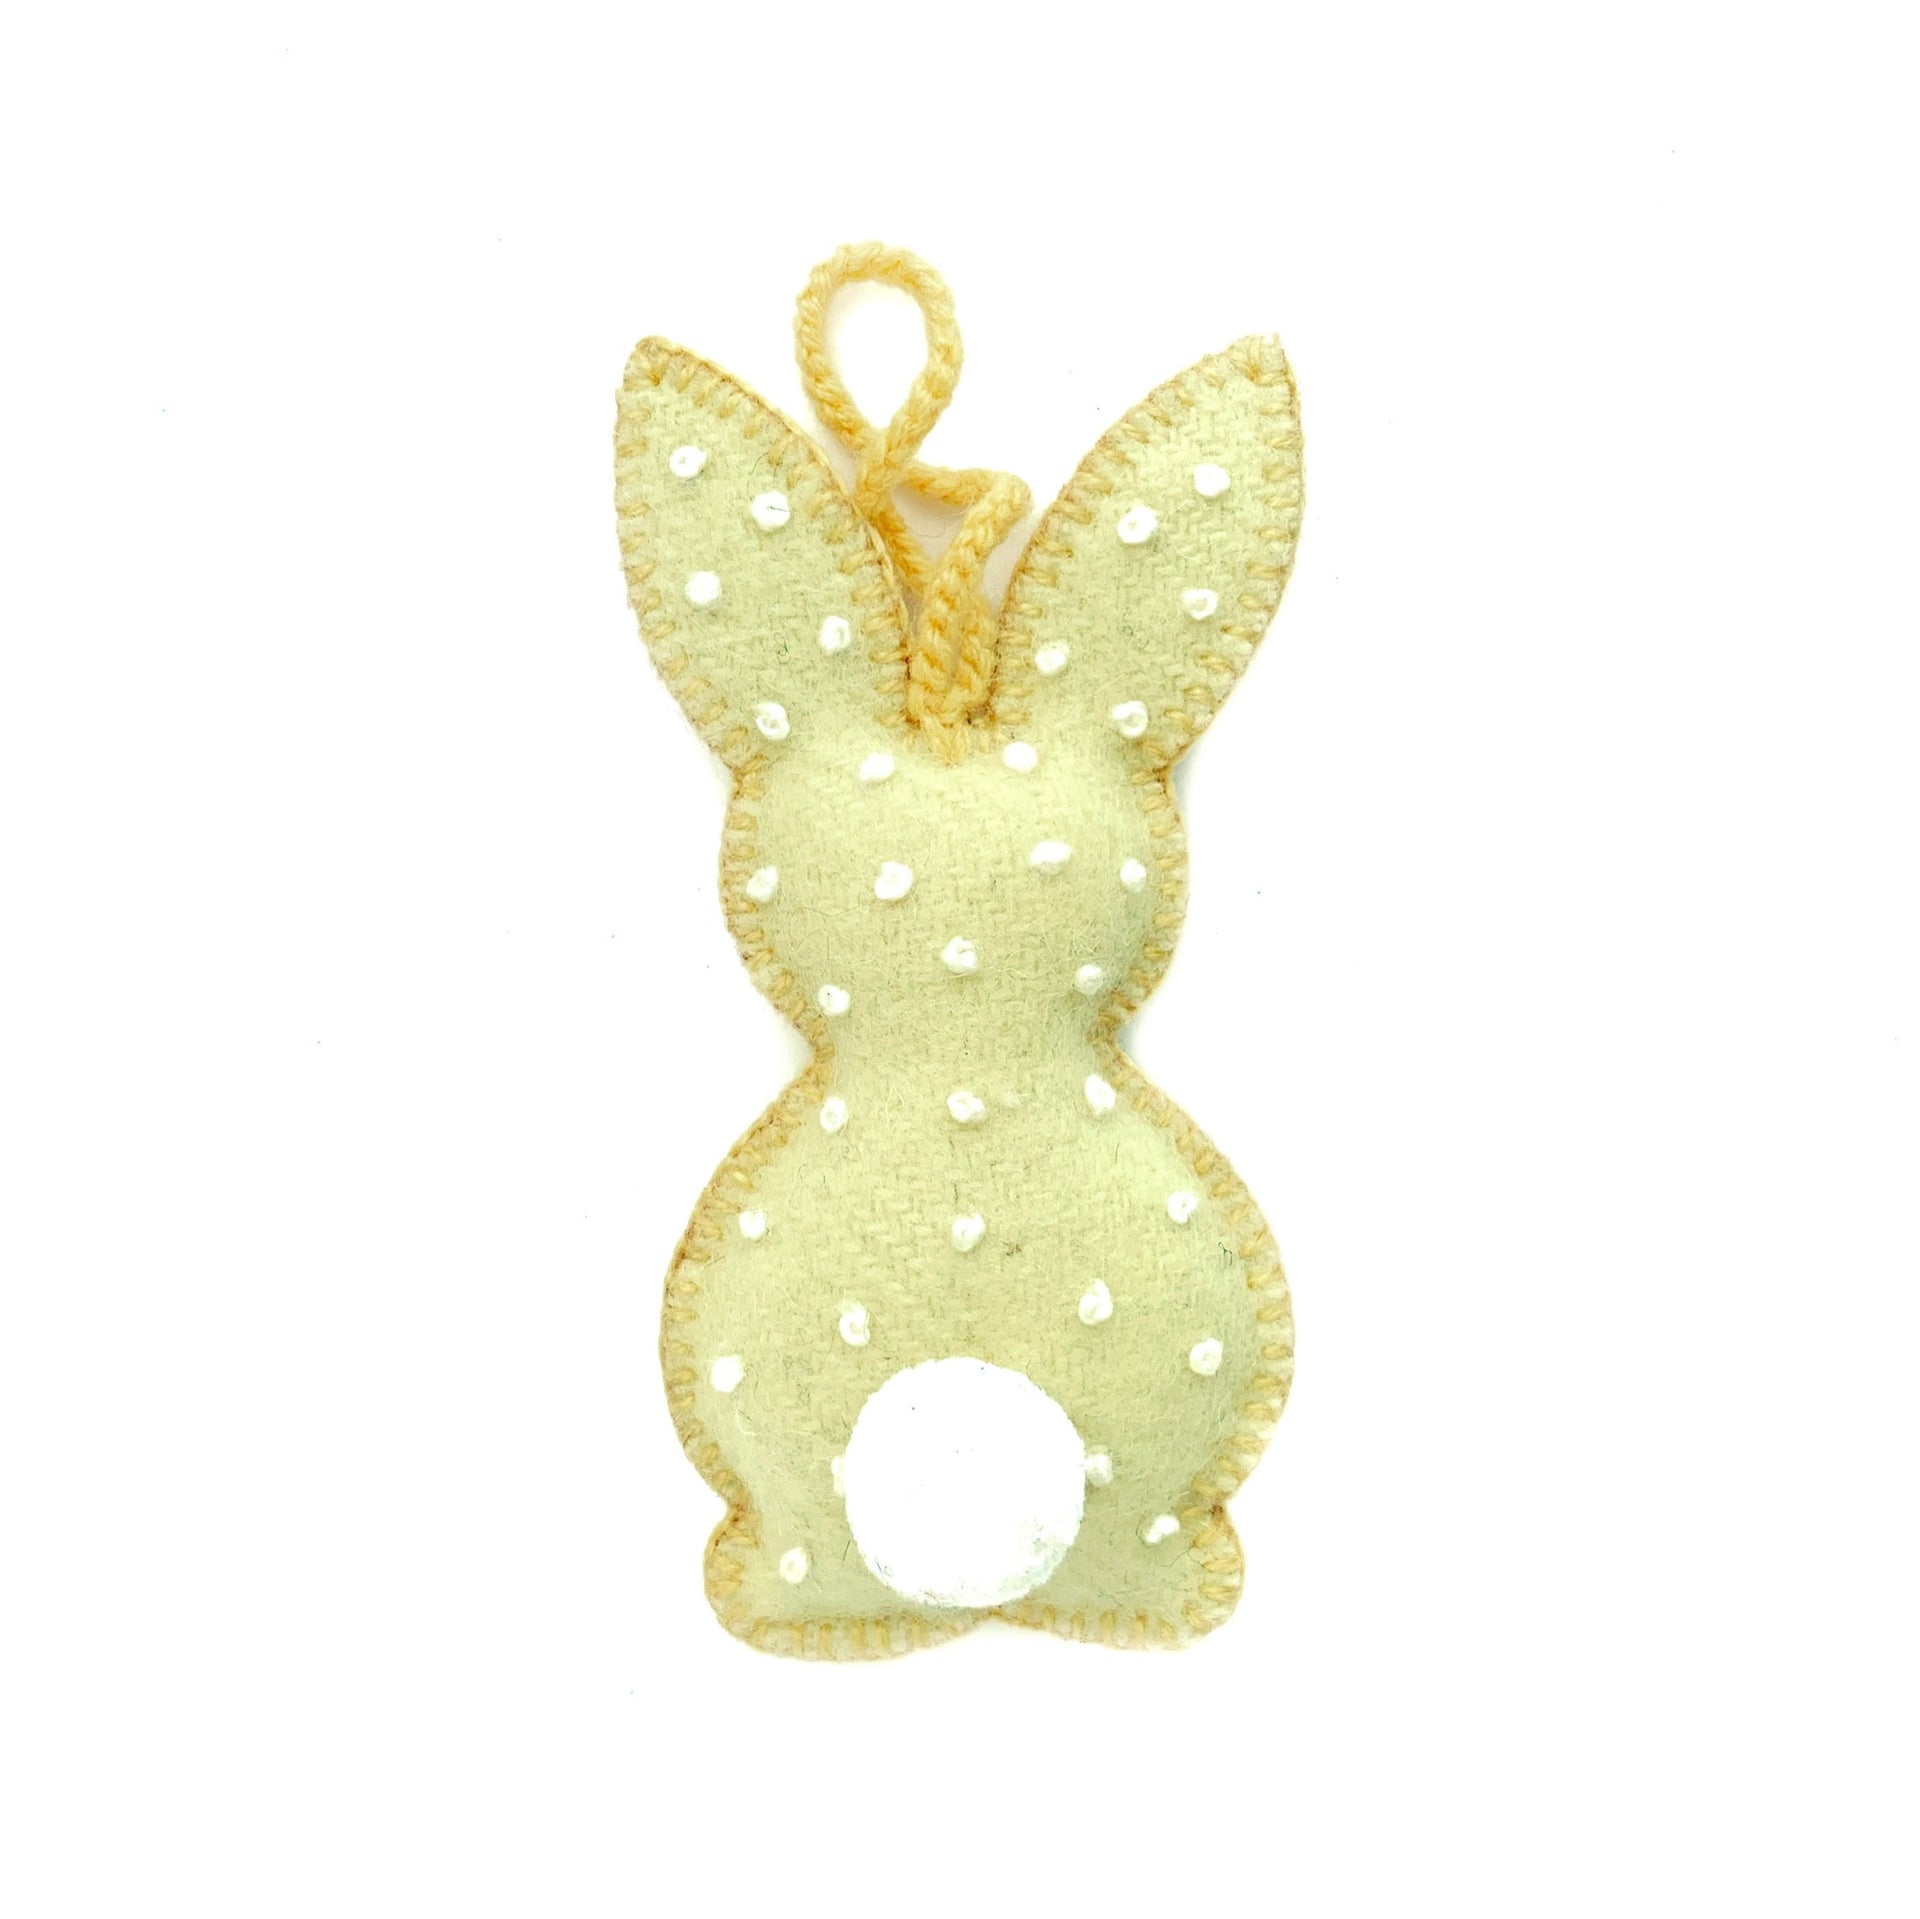 Pastel yellow handmade Easter bunny ornament with embroidered white dots and pom pom tail.